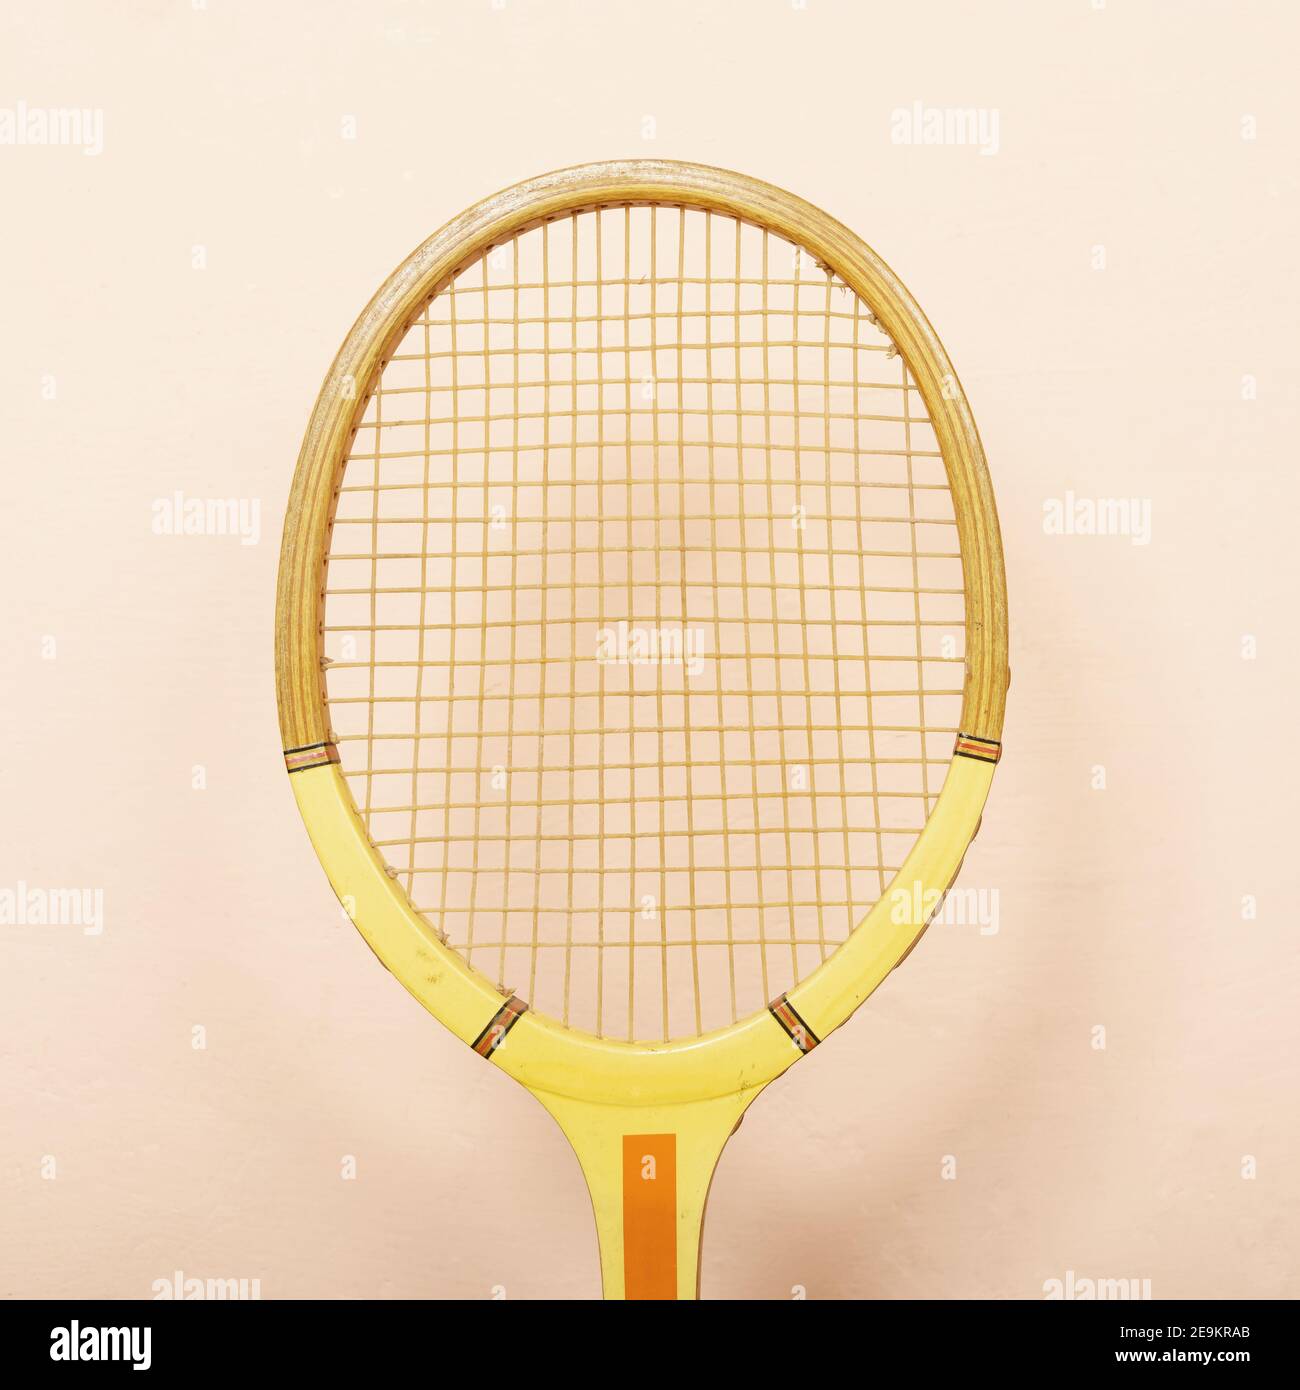 Vintage wooden tennis racket against pink wall, pastel tones of yellow, orange and pink, retro sport concept Stock Photo